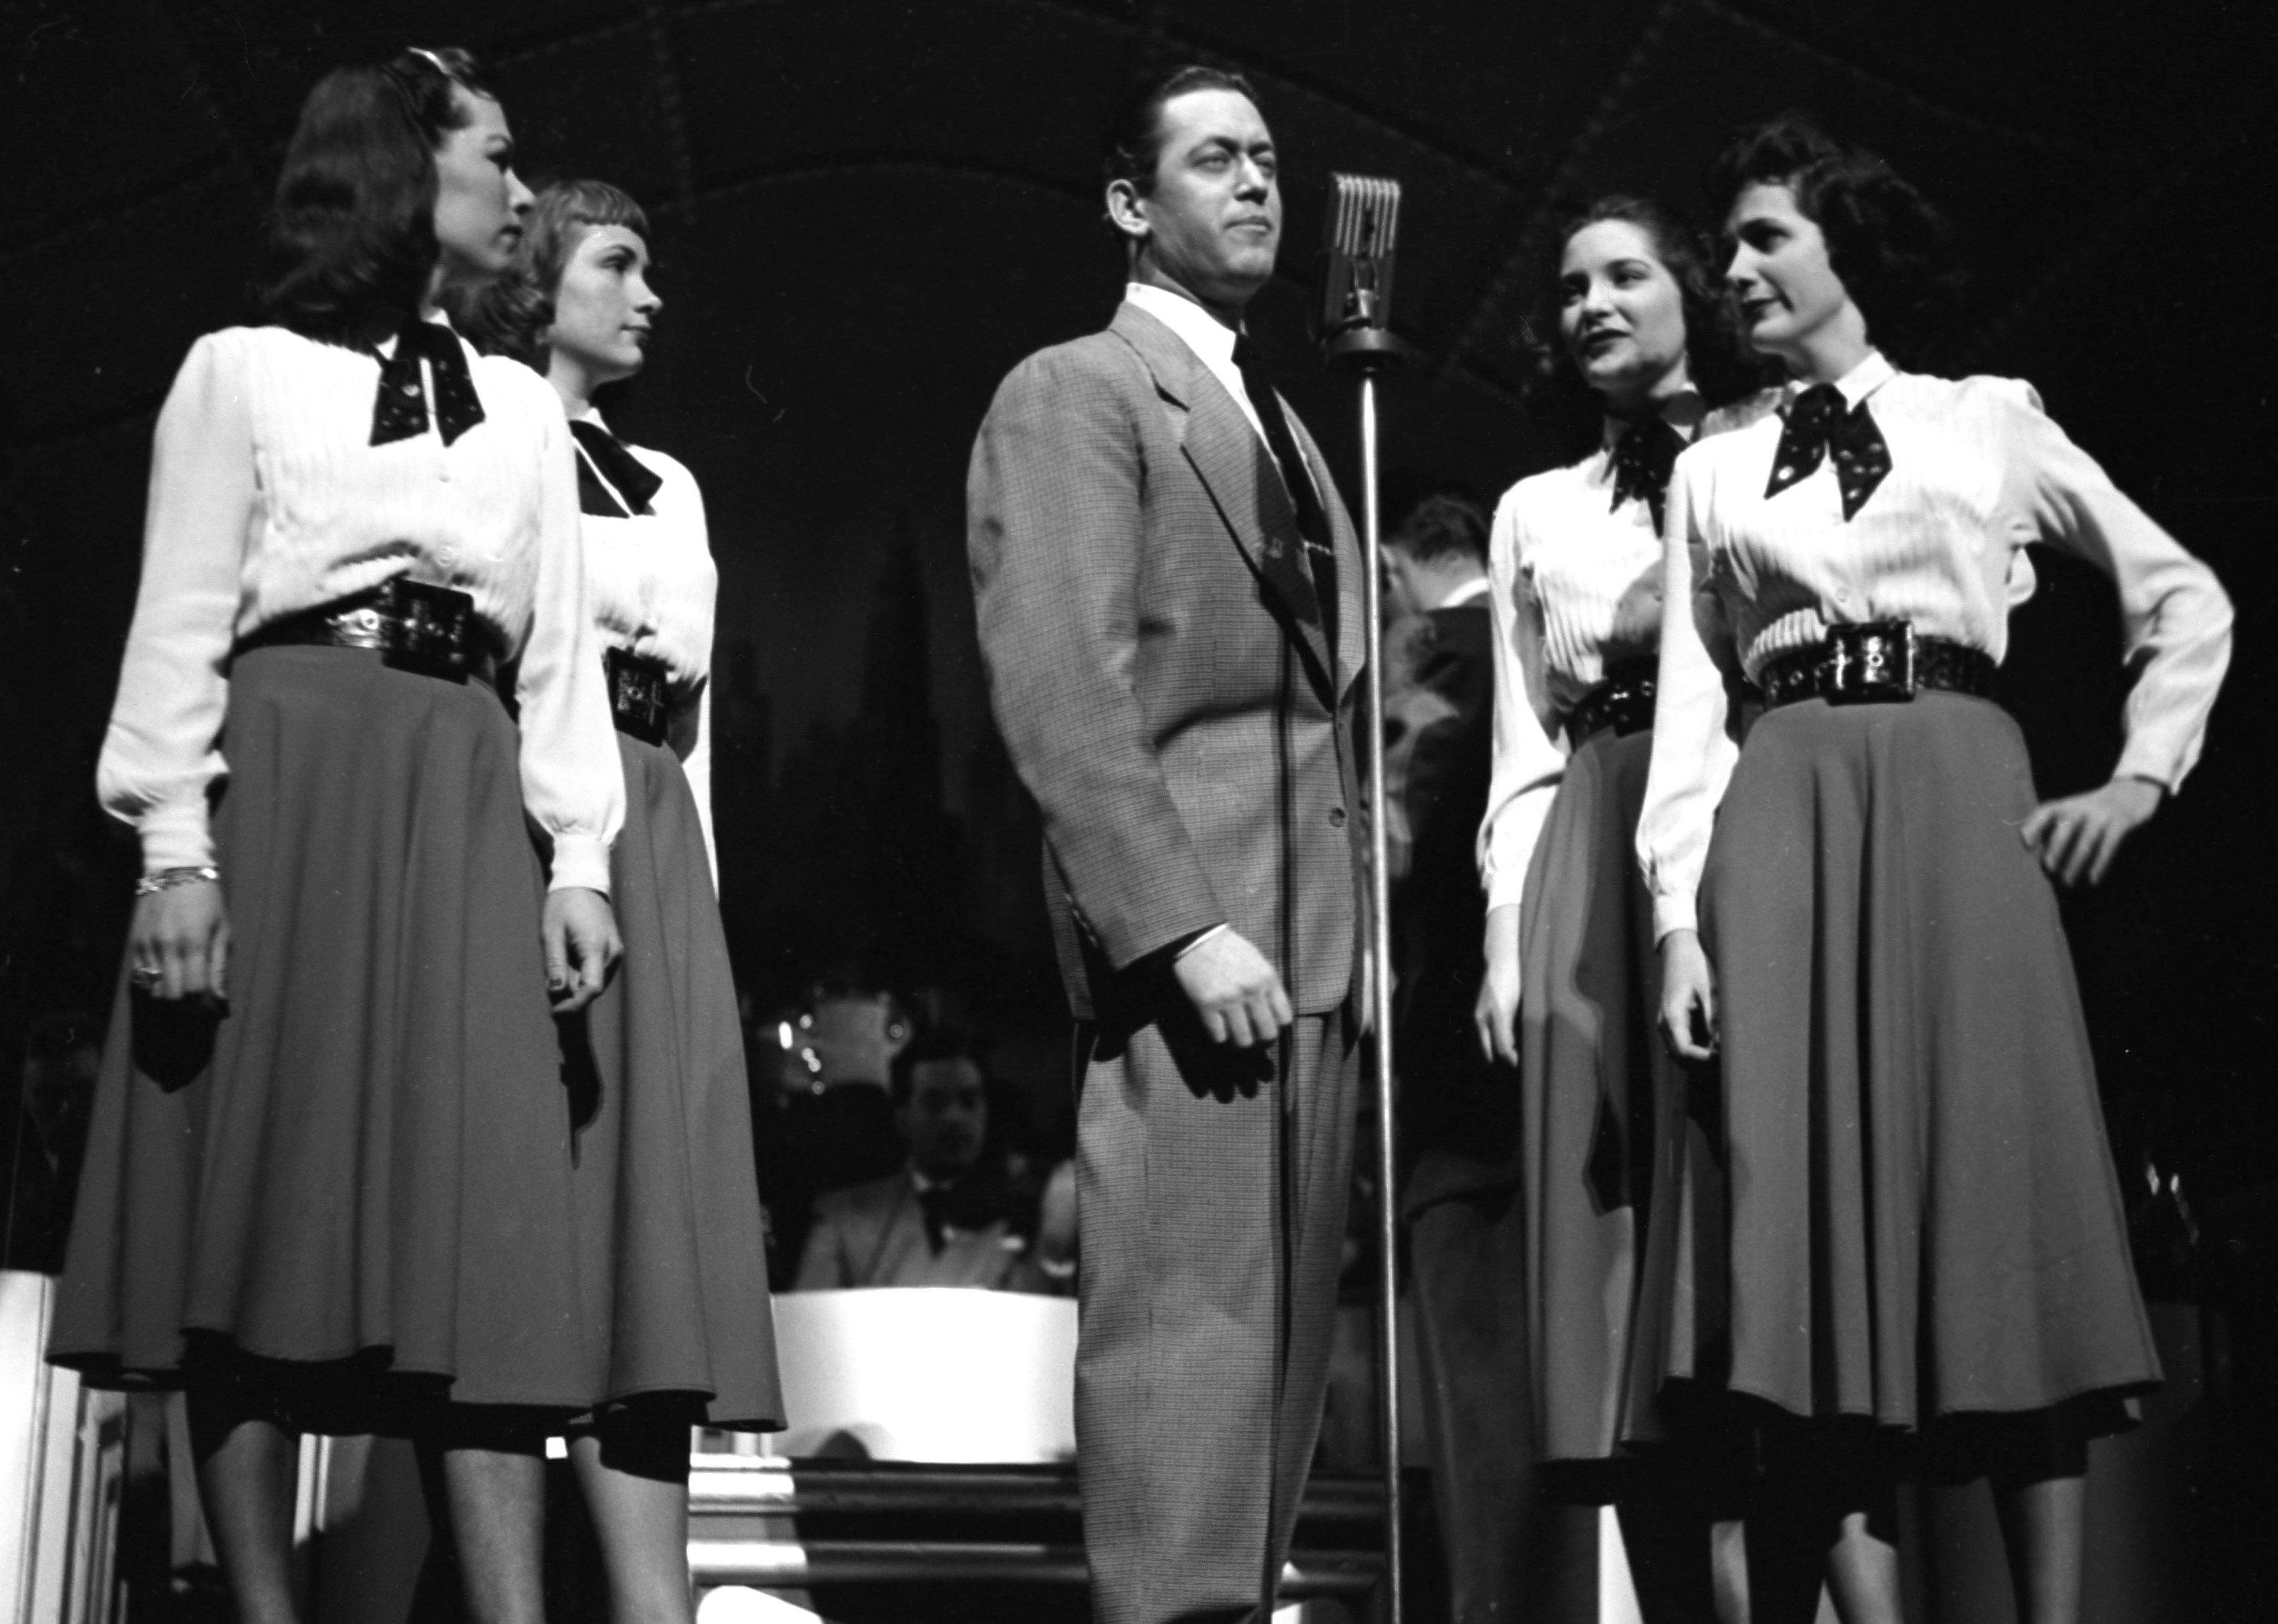 Vaughn Monroe singing onstage with a group of women.